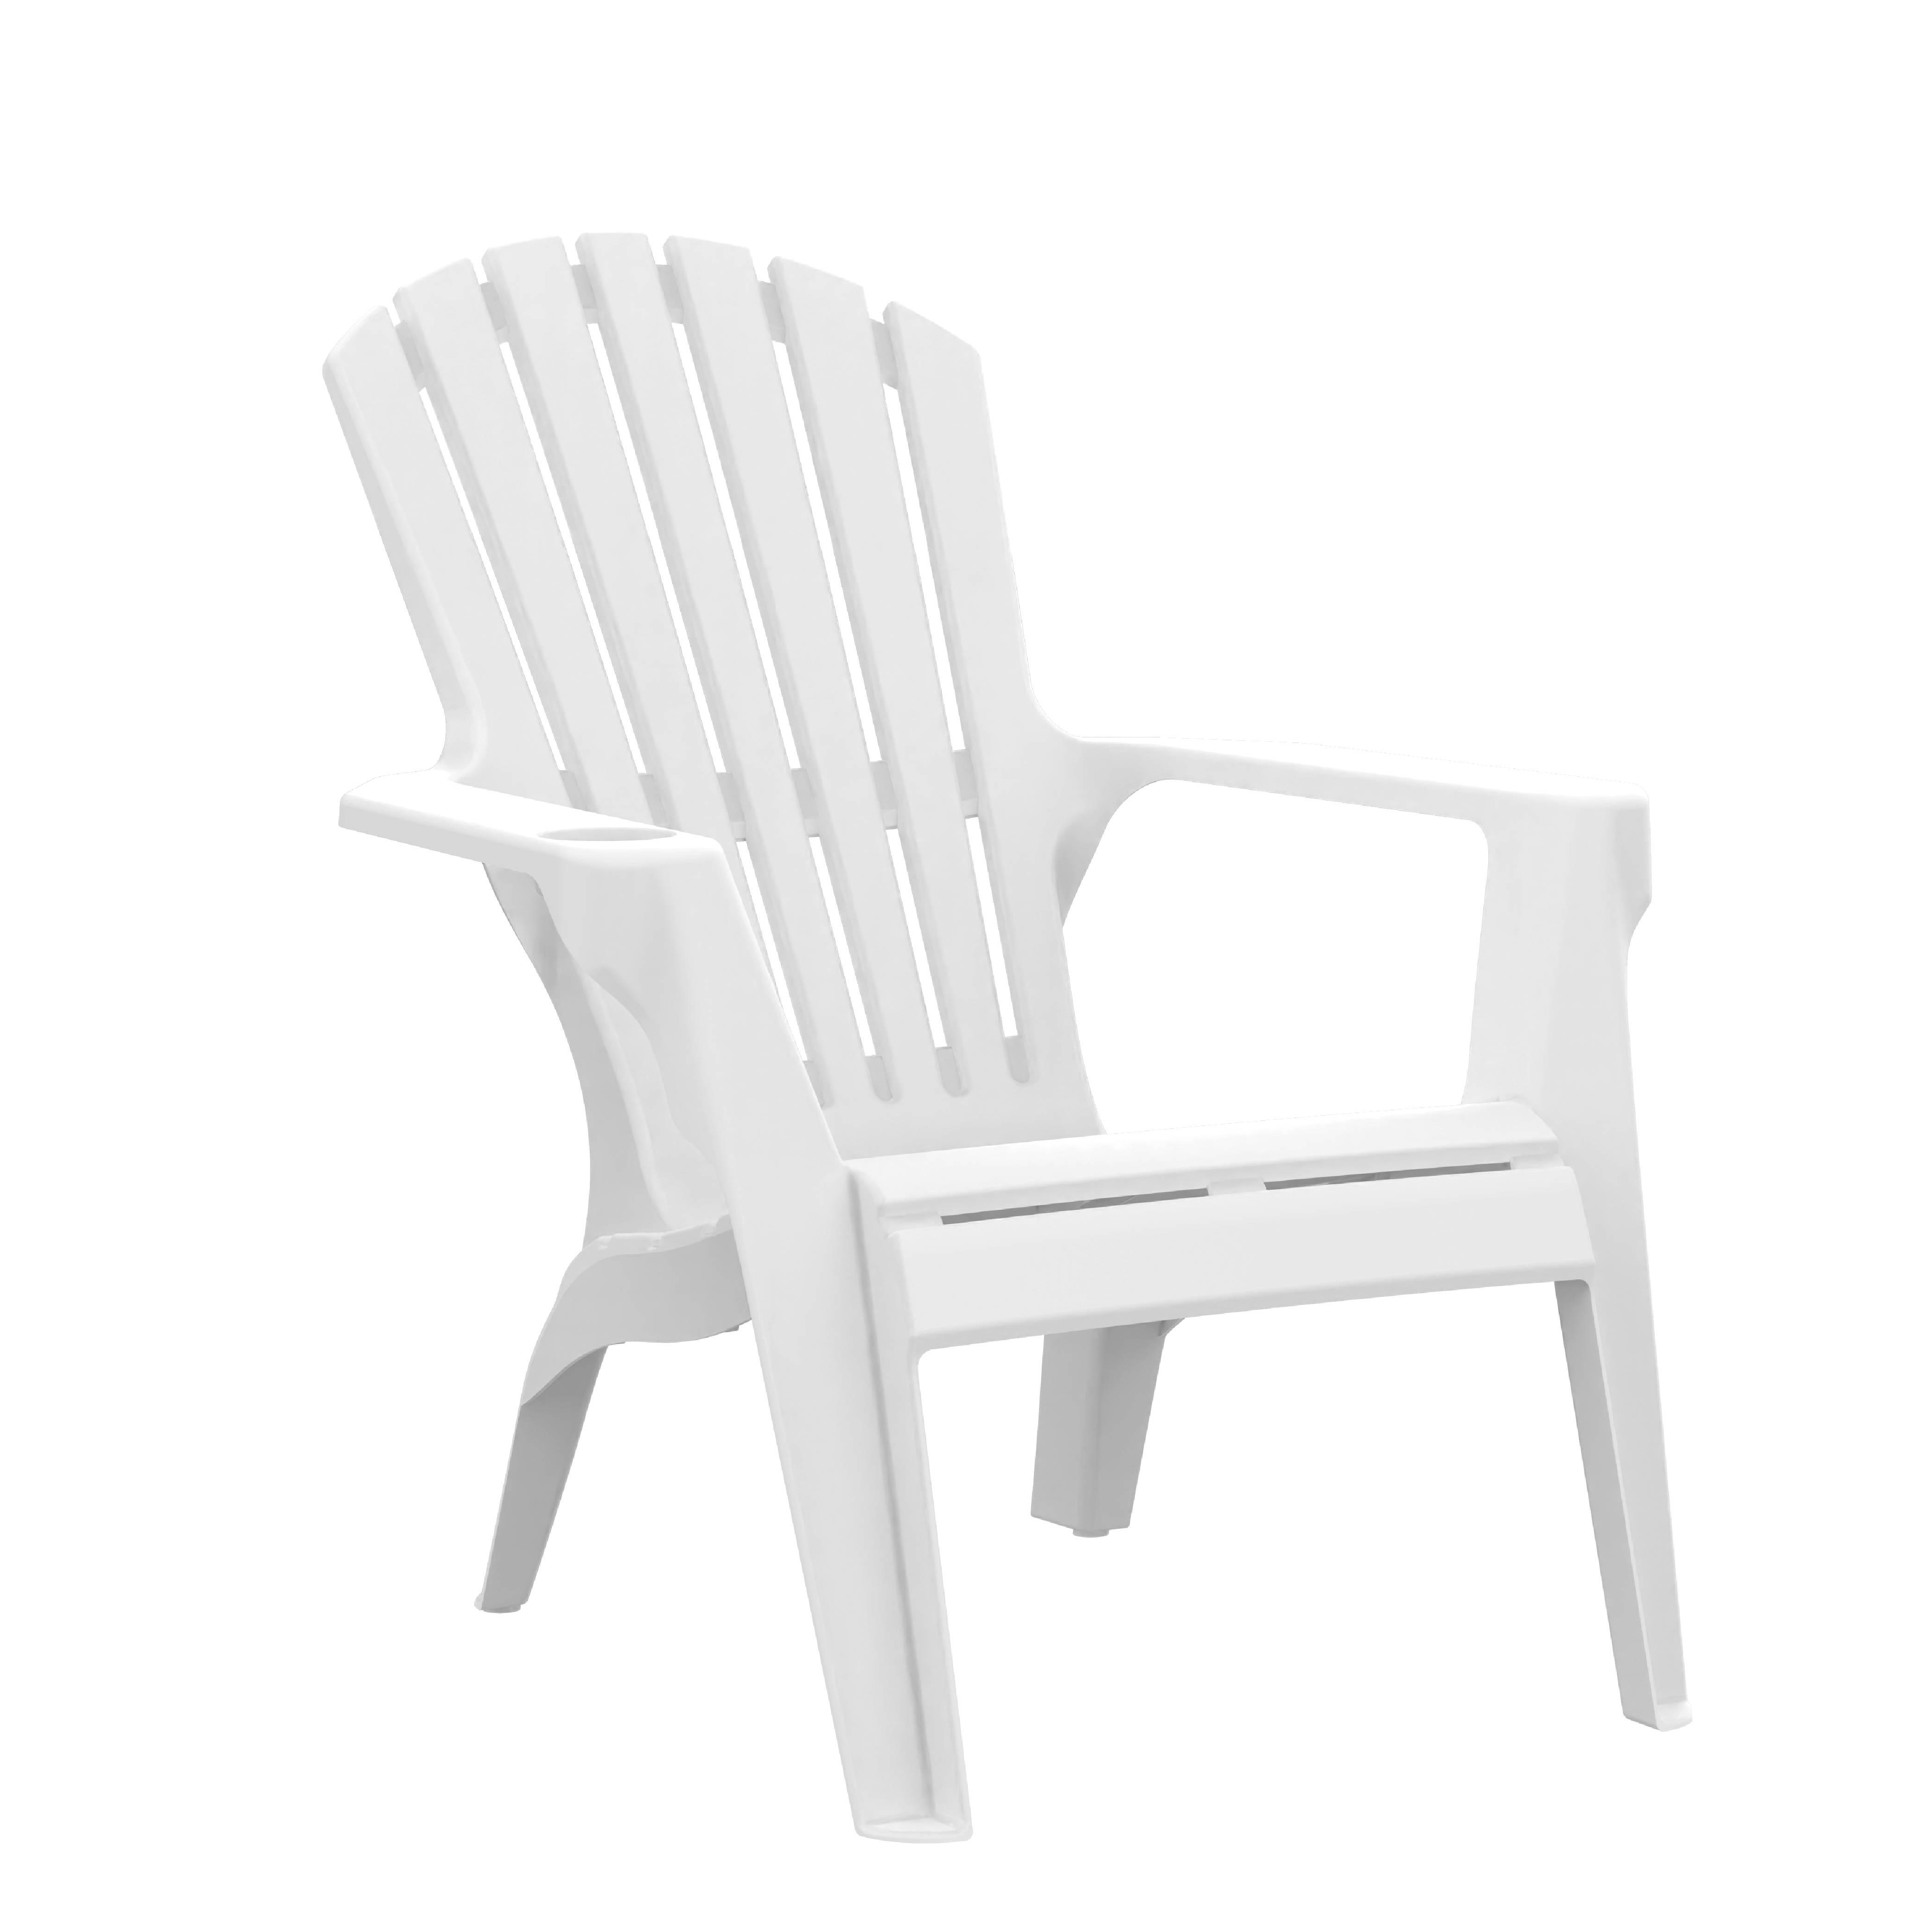 Wow sea chair with cup holder